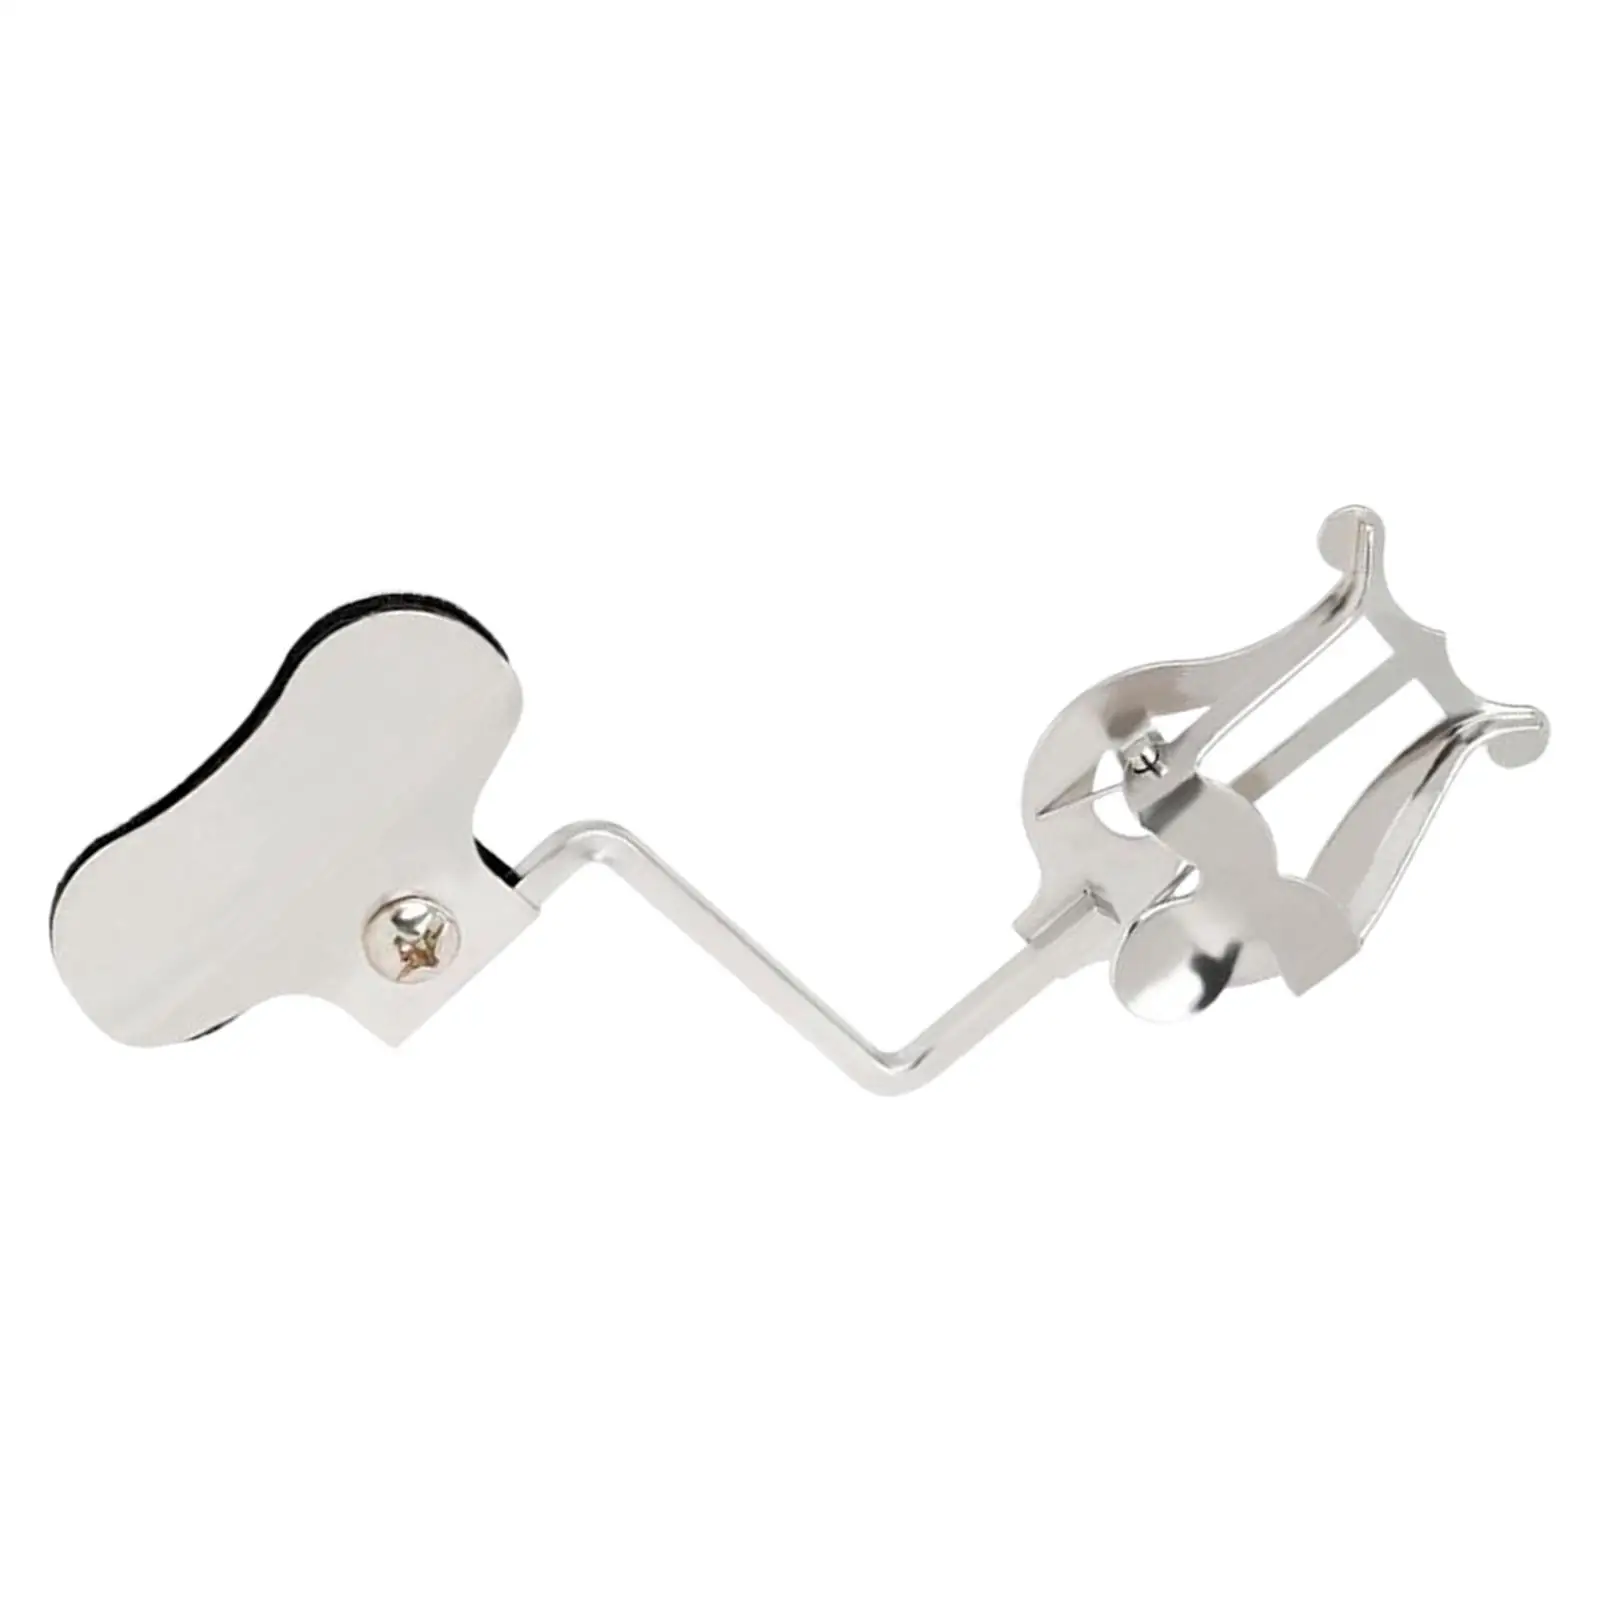 Music Clip Clamp On Holder Musical Instrument Accessory for Trombone Trumpet